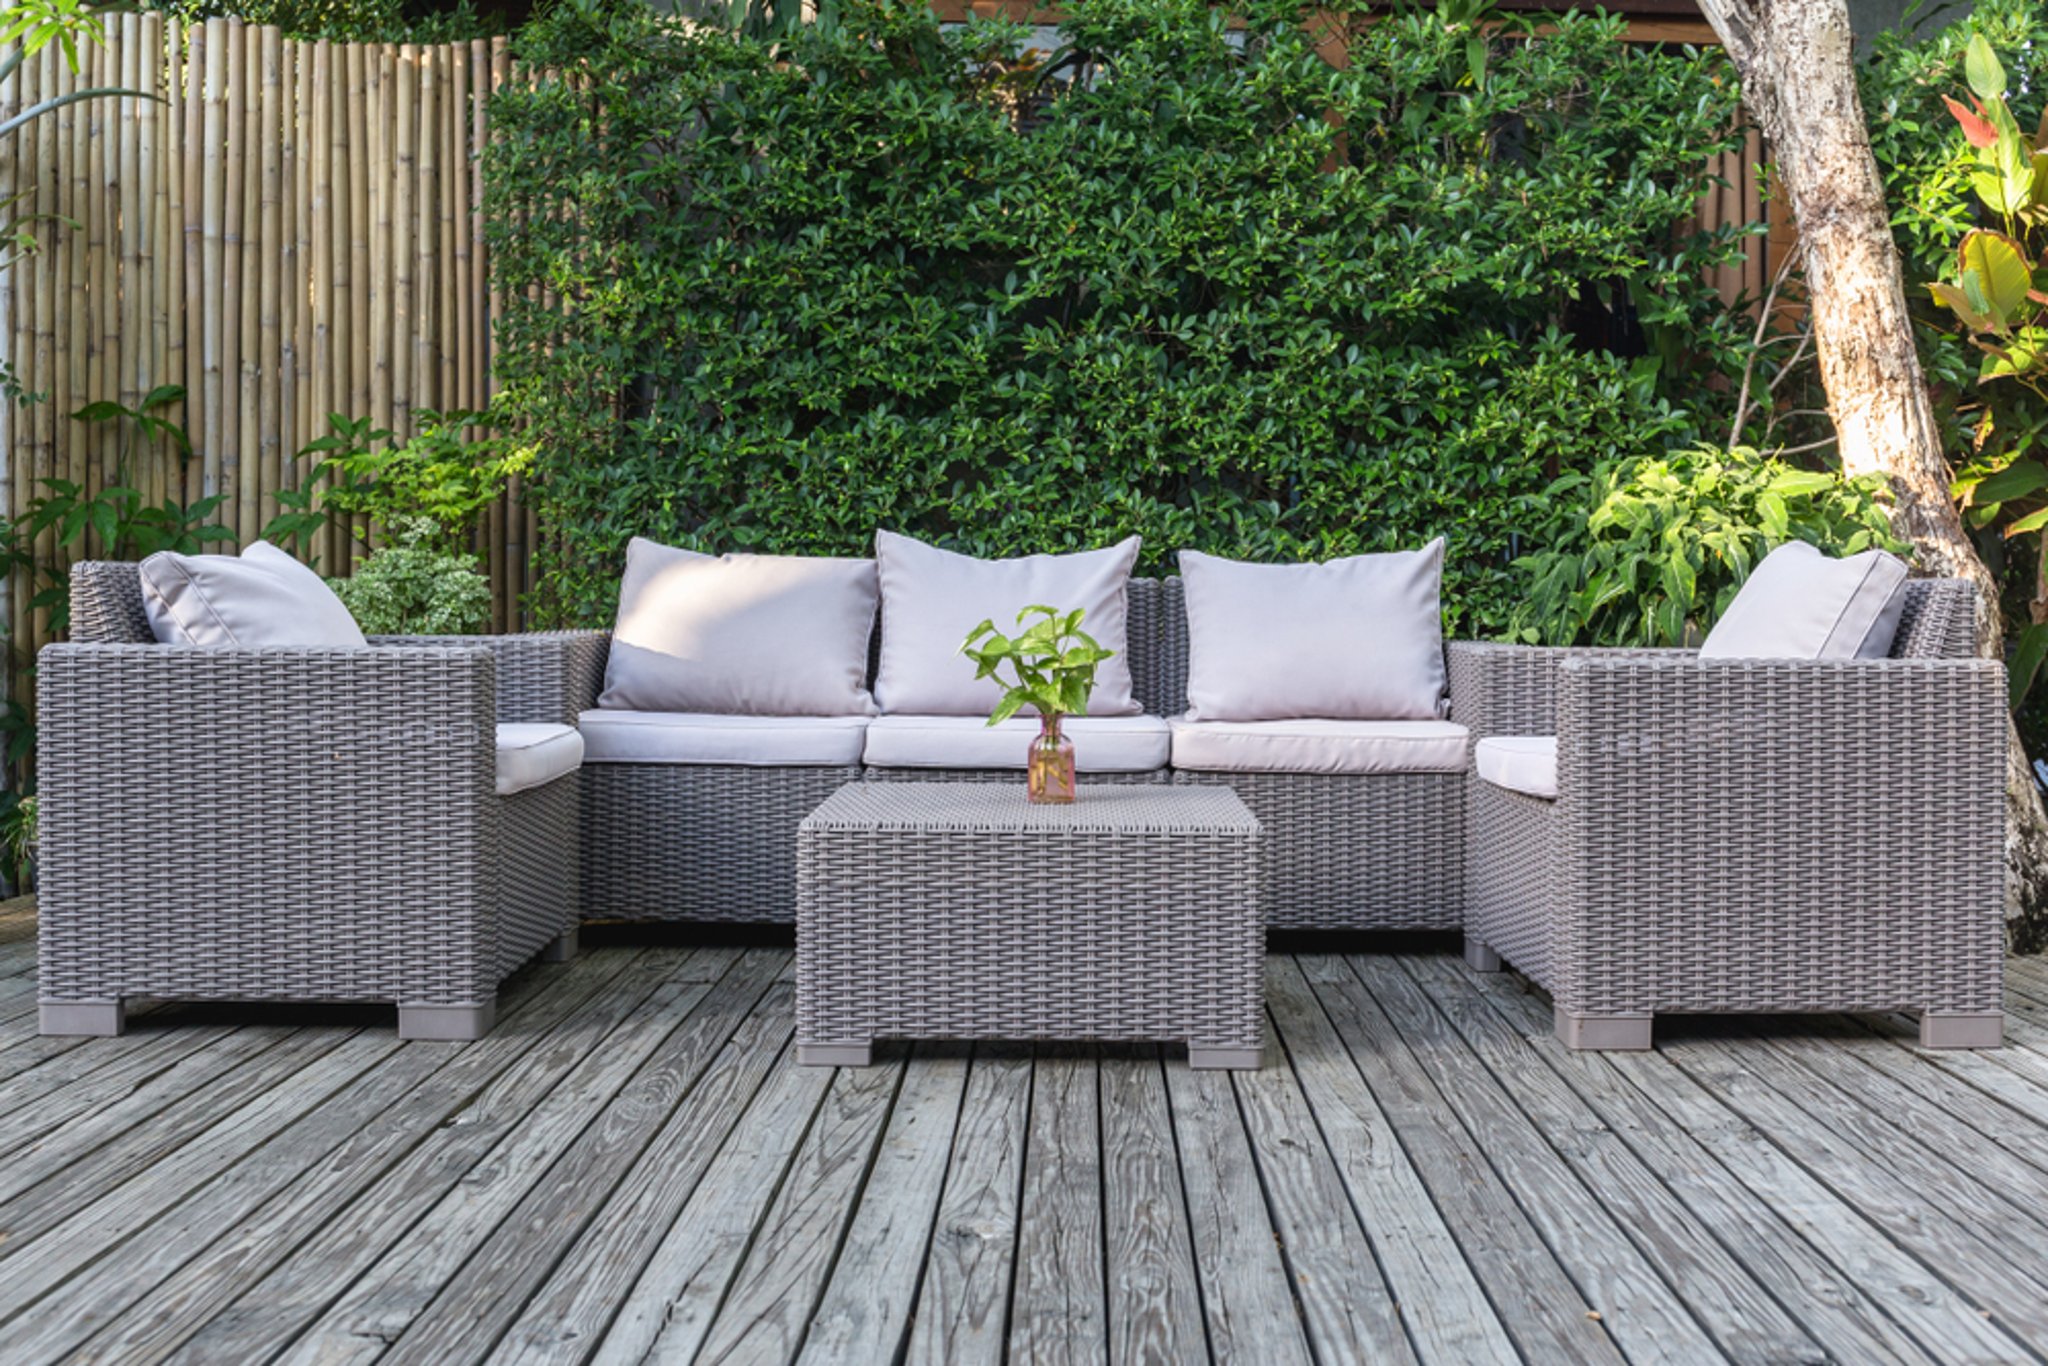 Best rattan garden furniture UK 2022: our pick of table and chair sets, sun loungers, and sofas for summer